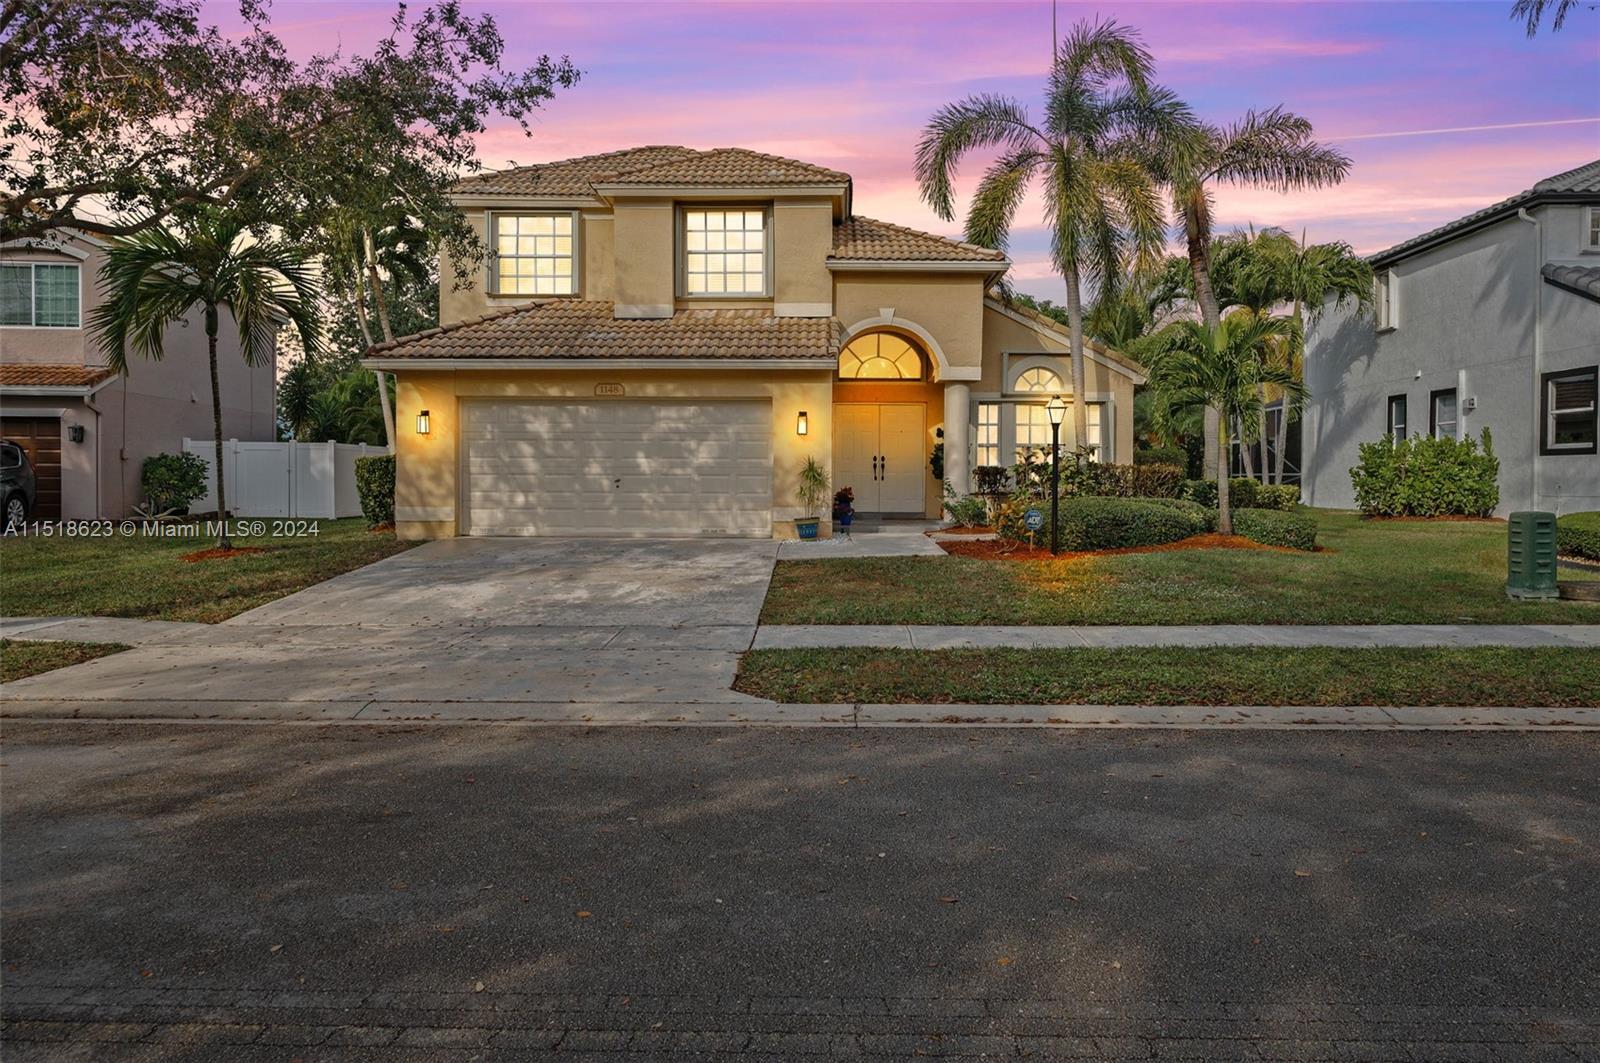 Photo of 1148 NW 133rd Ave in Pembroke Pines, FL